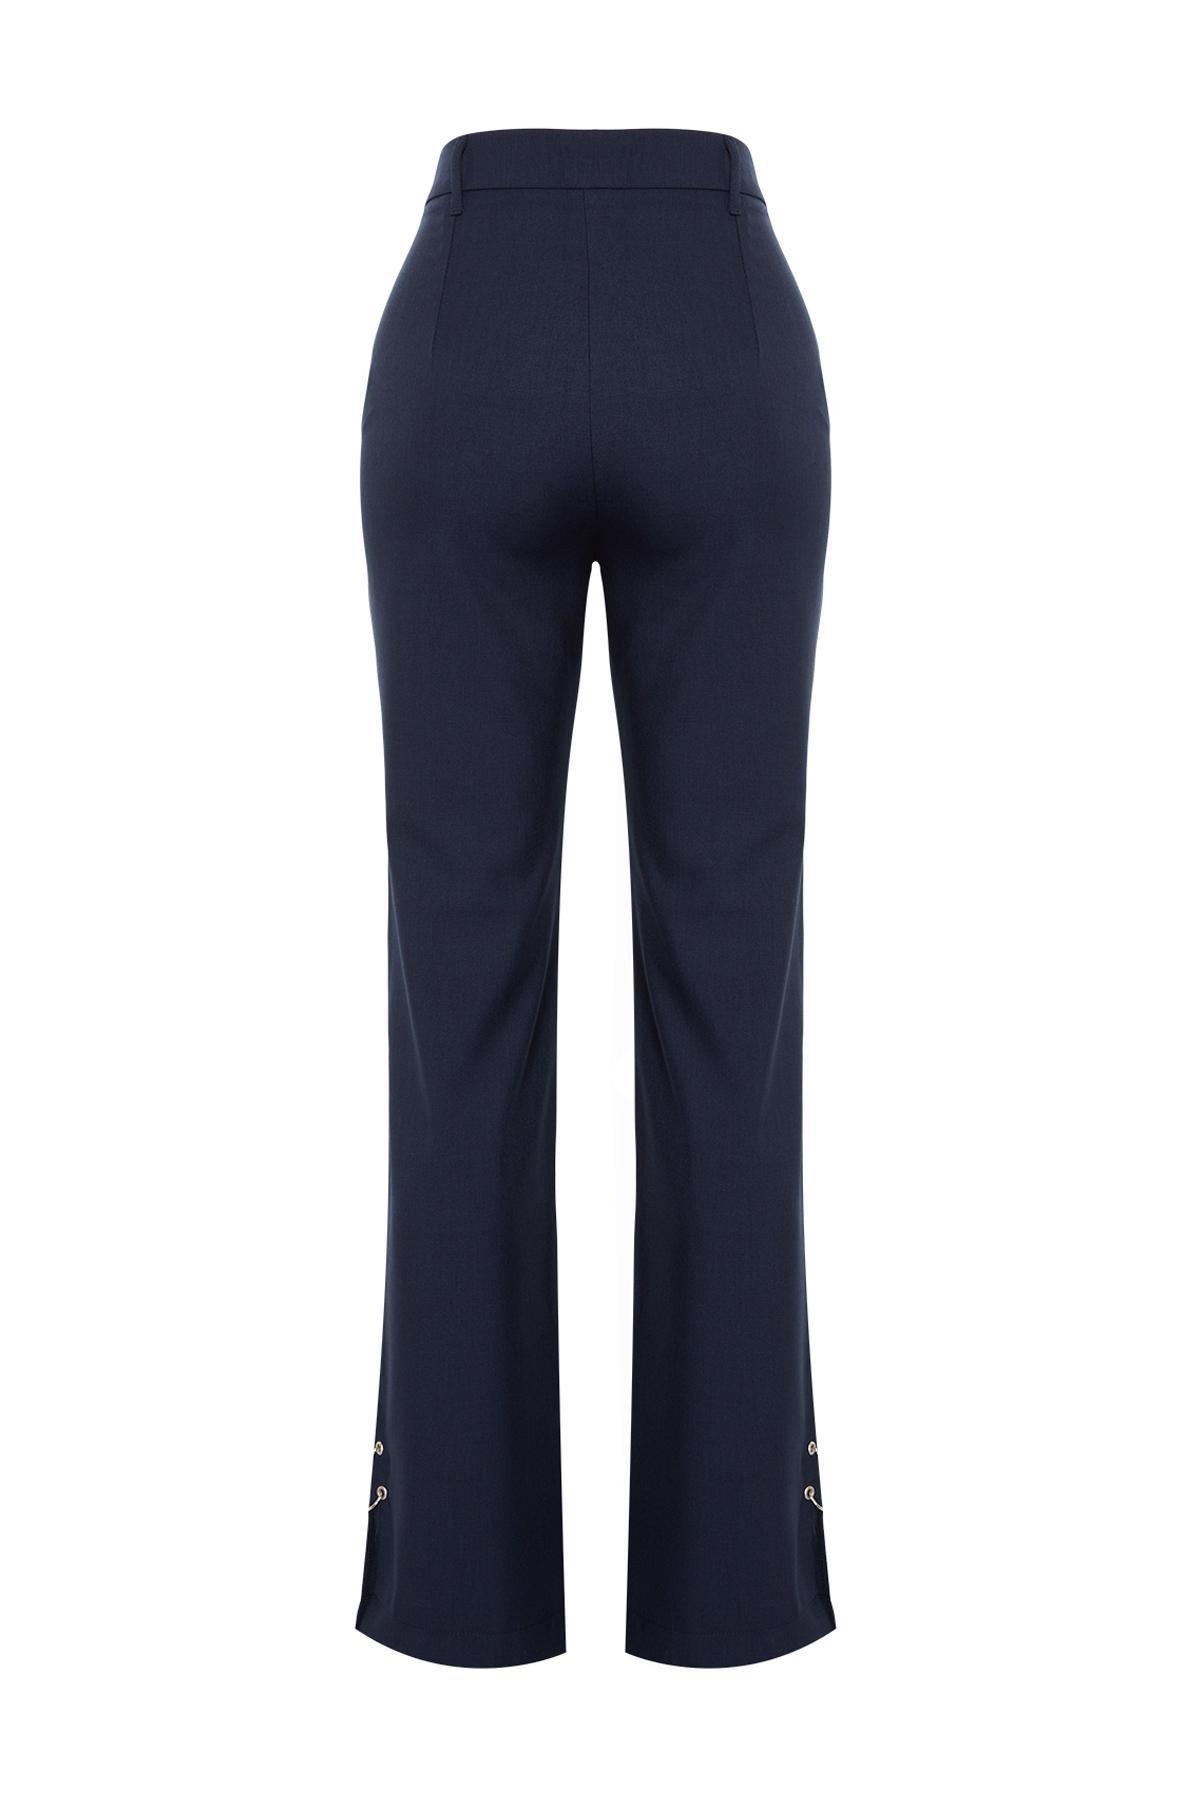 Trendyol - Navy Straight Ribbed Trousers